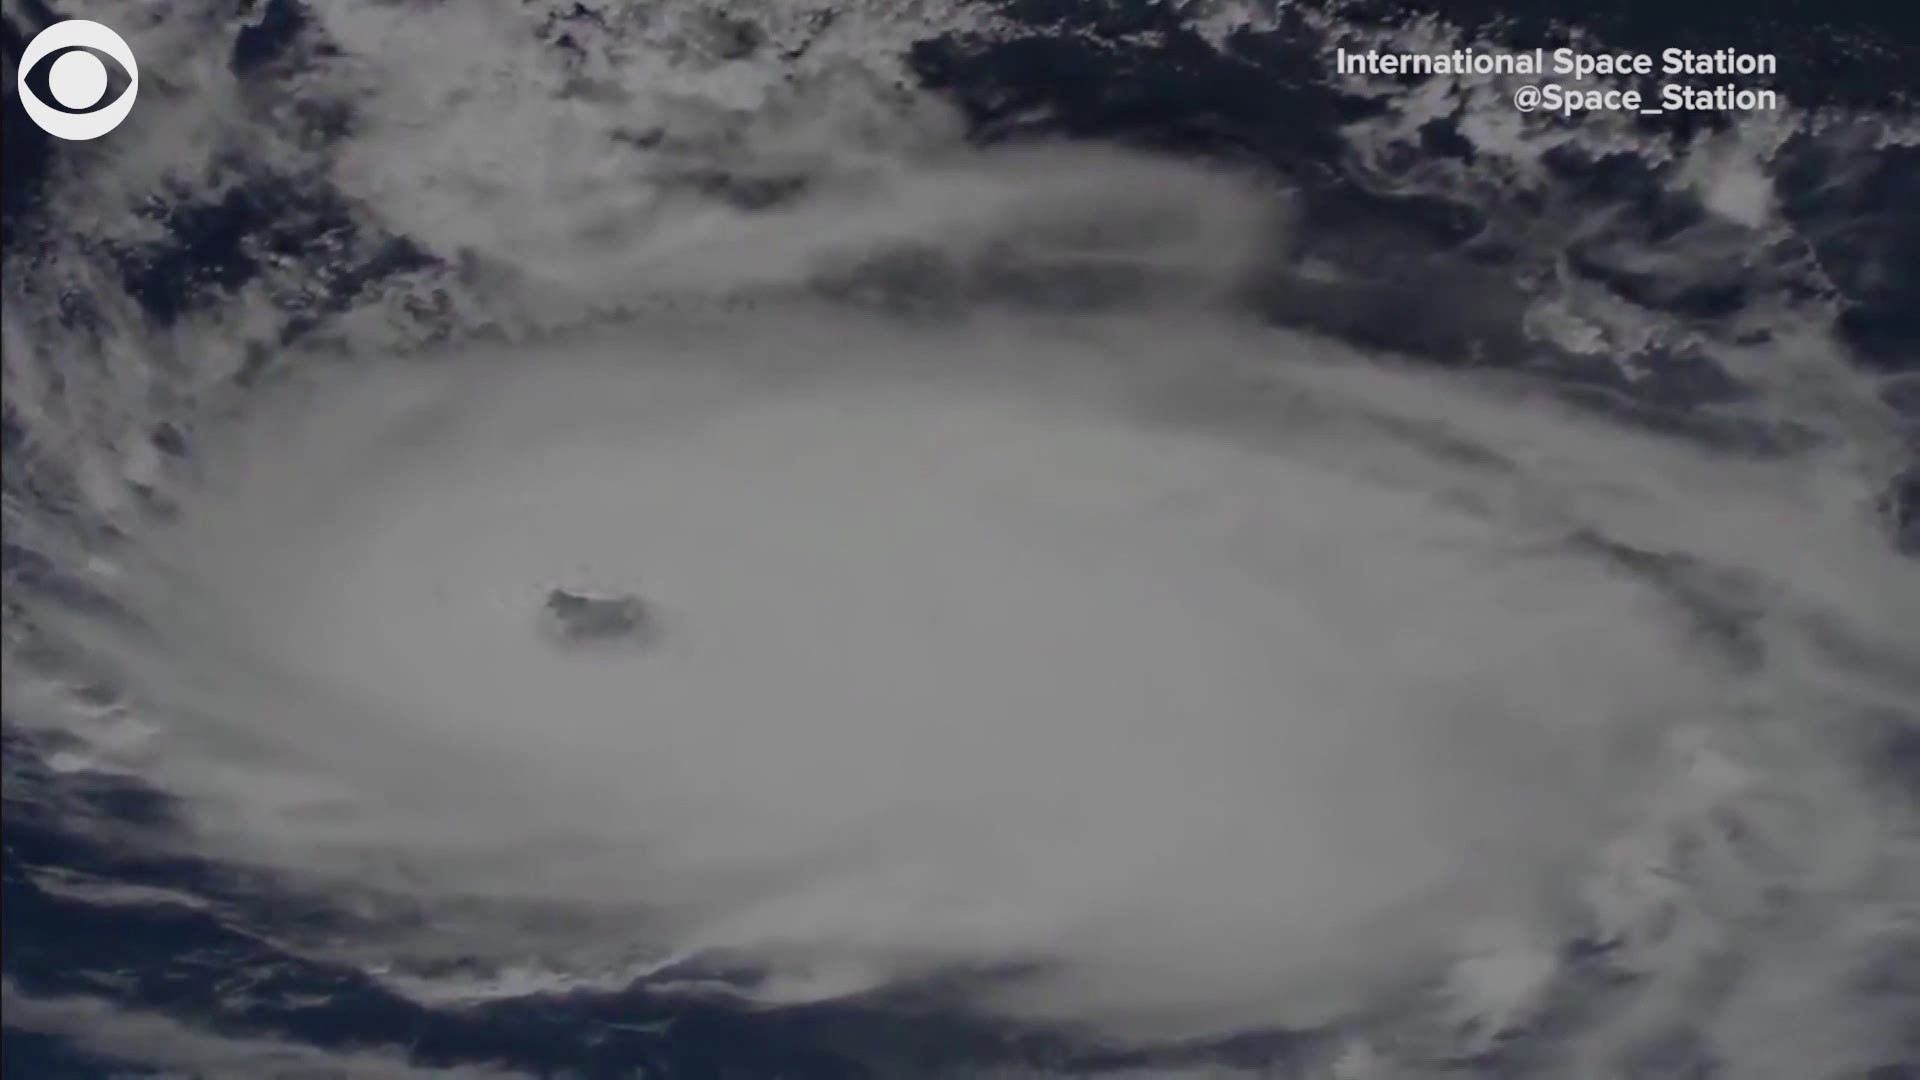 Hurricane Dorian, as seen from space: Incredible, maybe. Menacing, yes.

Cameras positioned outside the International Space Station captured awe-inspiring views of the powerful storm as it moved overhead Saturday. As a Category 4 hurricane at the time the video was taken, the eye of Dorian appeared obvious.